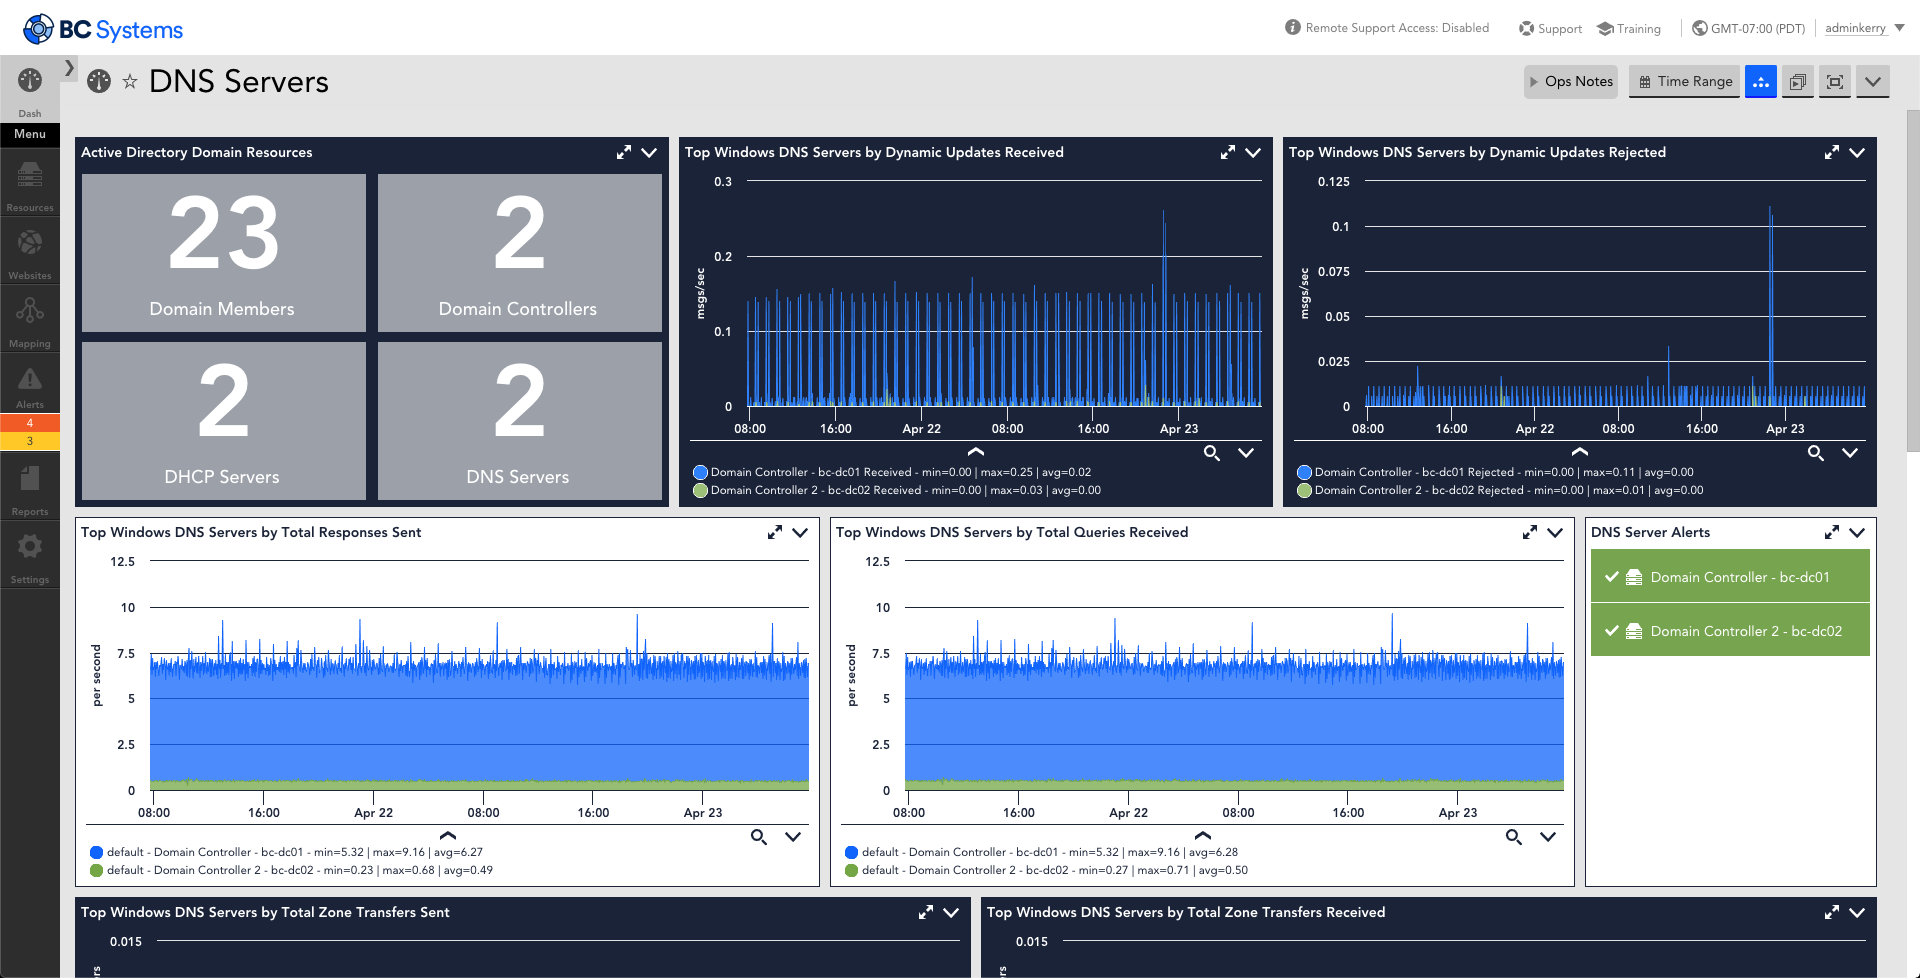 This dashboard provides an a listing of various metrics that are monitored for MS DNS Servers. The metrics displayed are domain resource counts: members, controllers, DHCP servers, DNS servers, updates received over time updates rejected over time, total responses sent over time, total queries received over time, alert status, zone transfers sent over time, zone transfers received over time